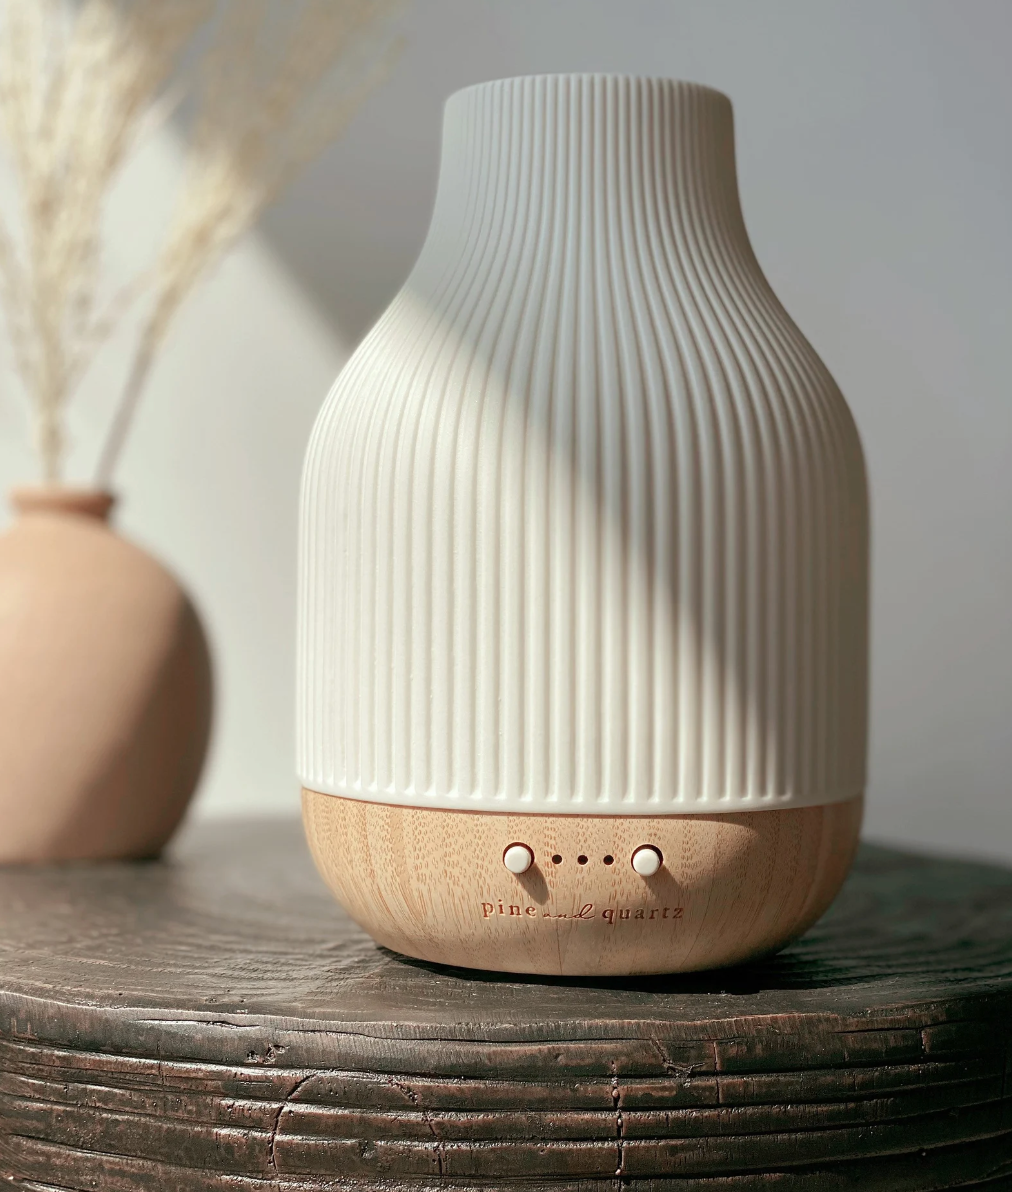 the ceramic and bamboo diffuser on a dark, wooden table